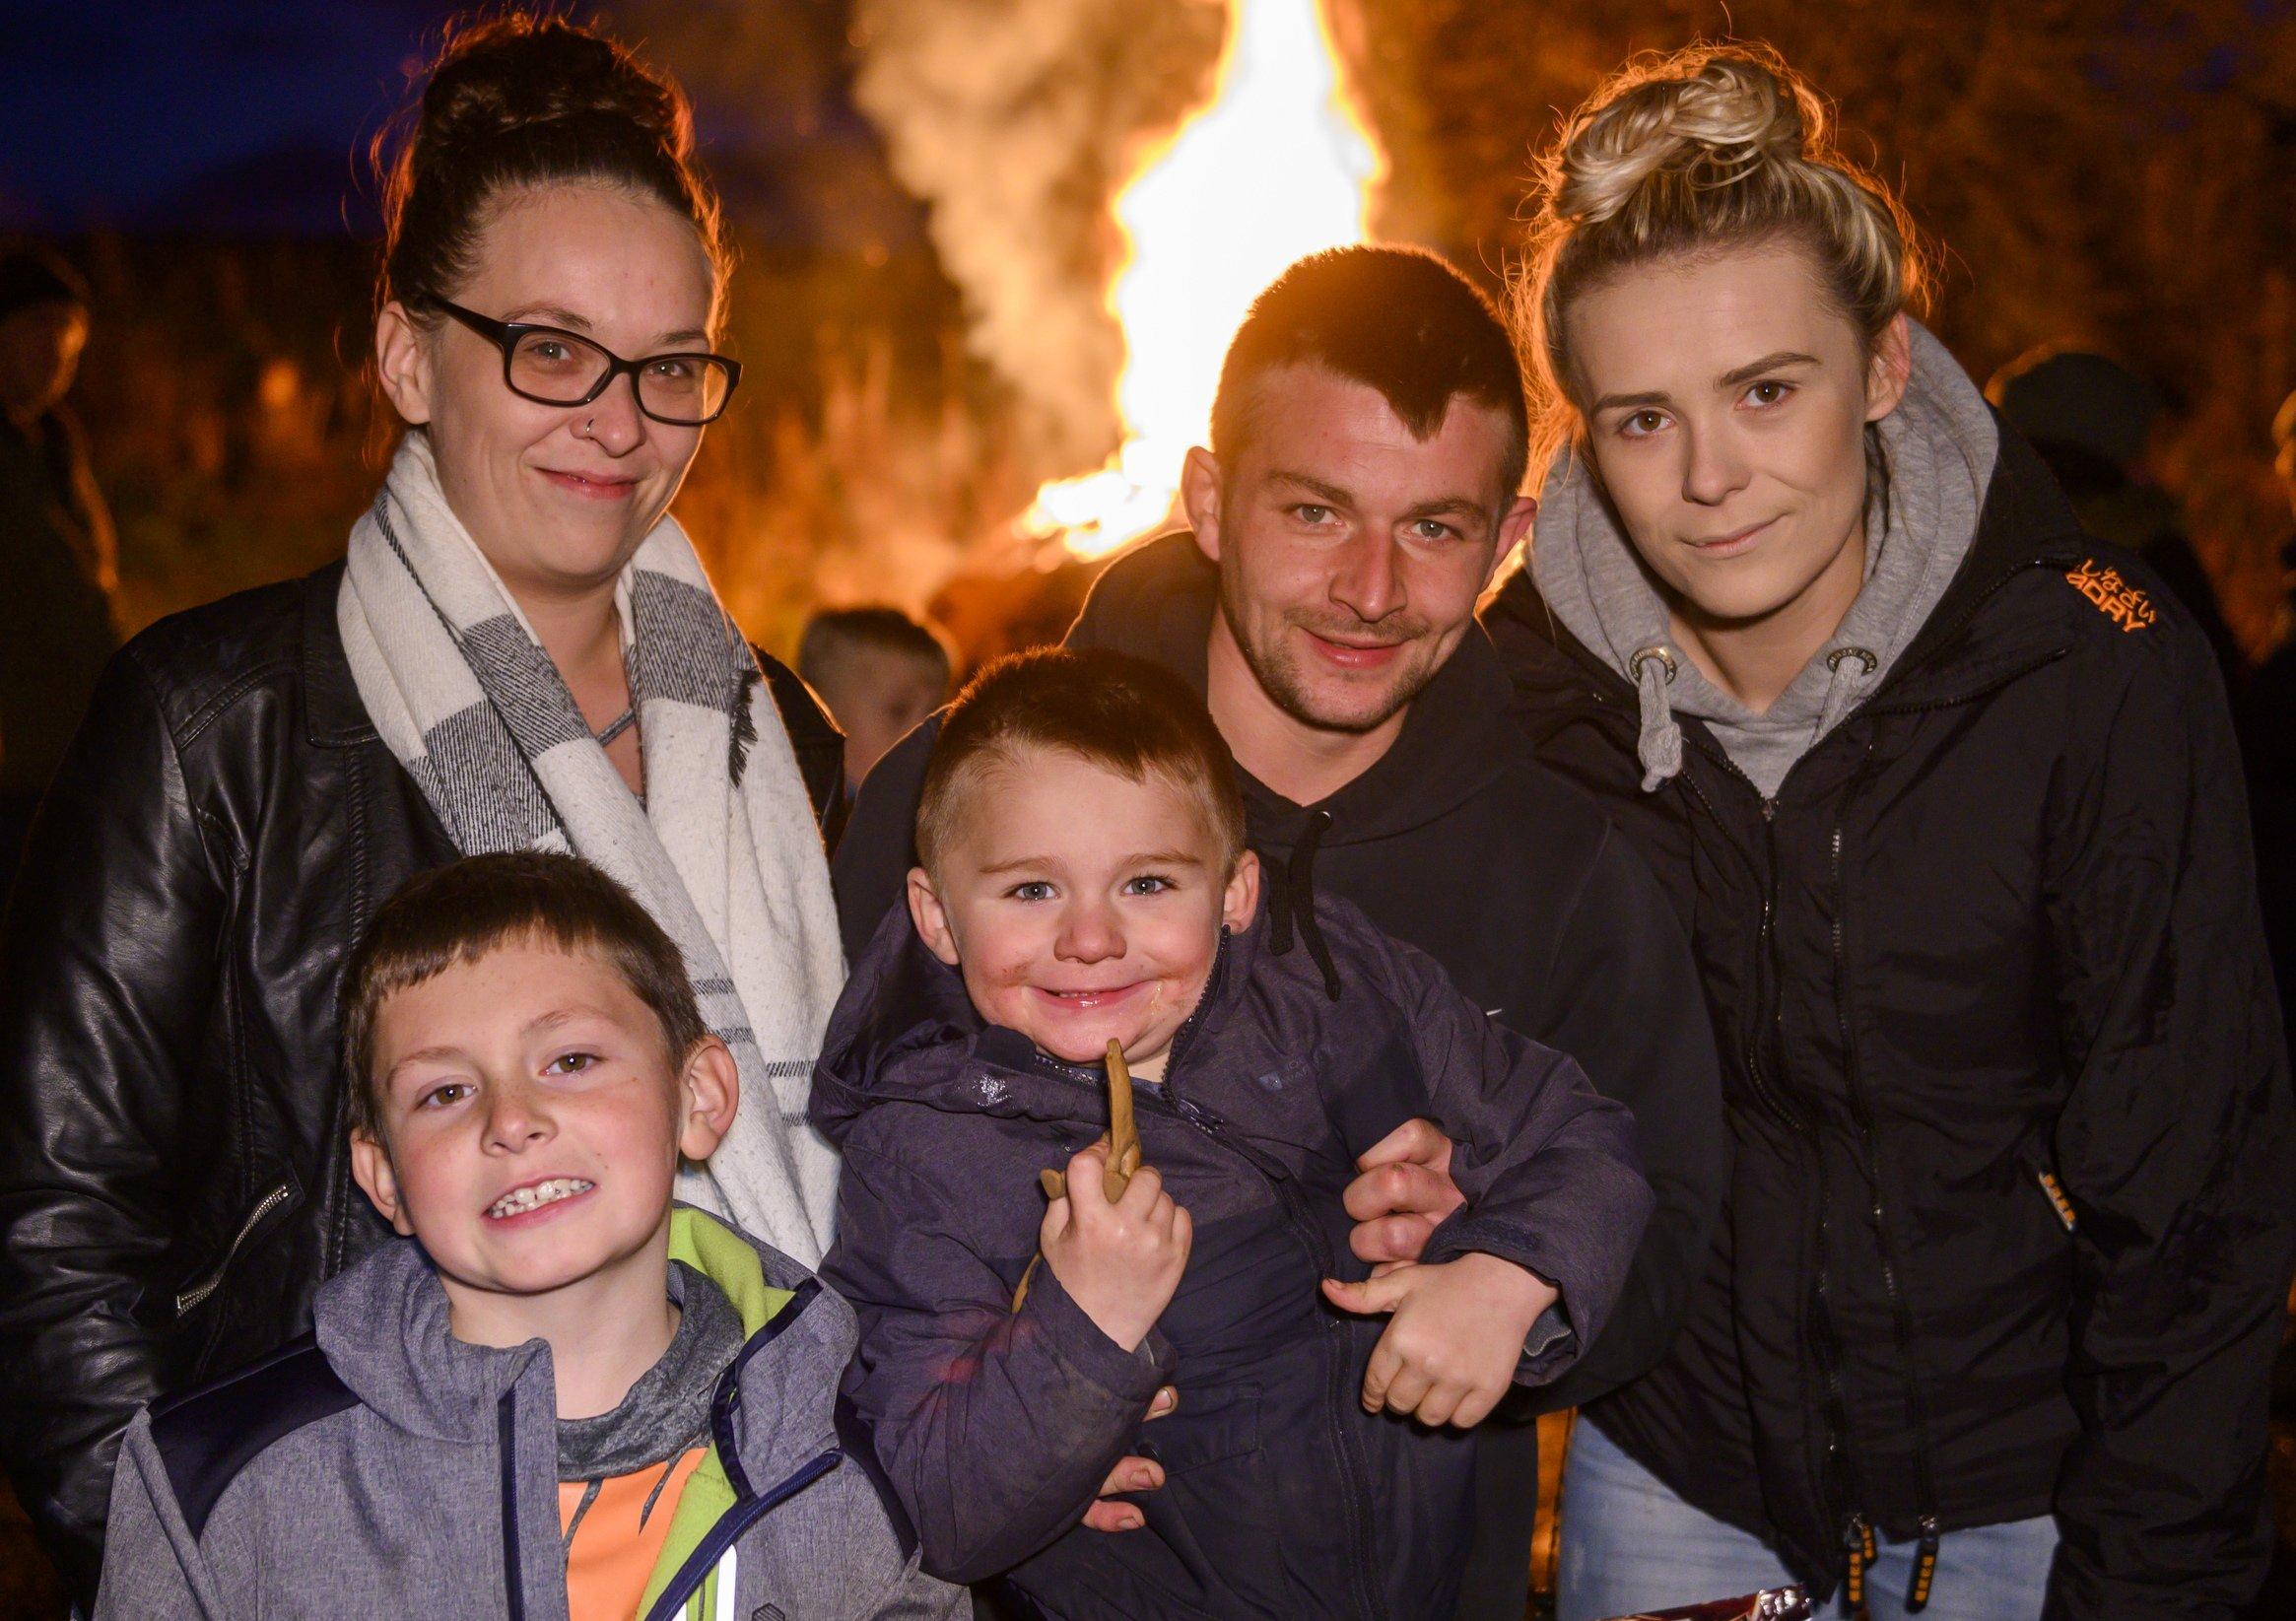 Lauder fireworks display 2019

Rebecca Mcewen with son AJ and Elisha Mcewen.
and Daniel and Carlton Spoor.

Pic Phil Wilkinson 
info@philspix.com